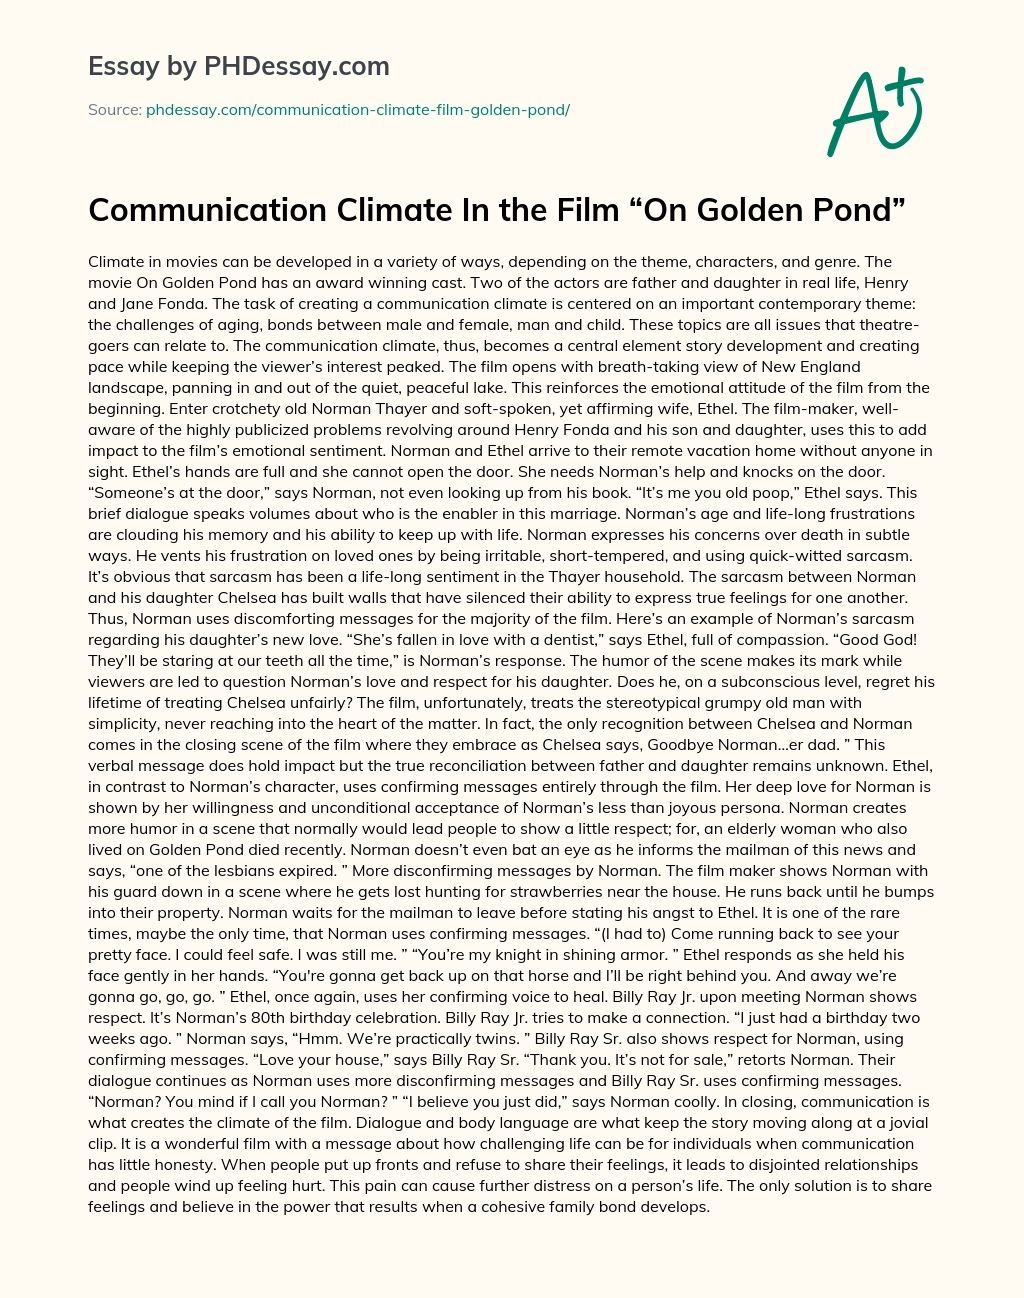 Communication Climate In the Film “On Golden Pond” essay